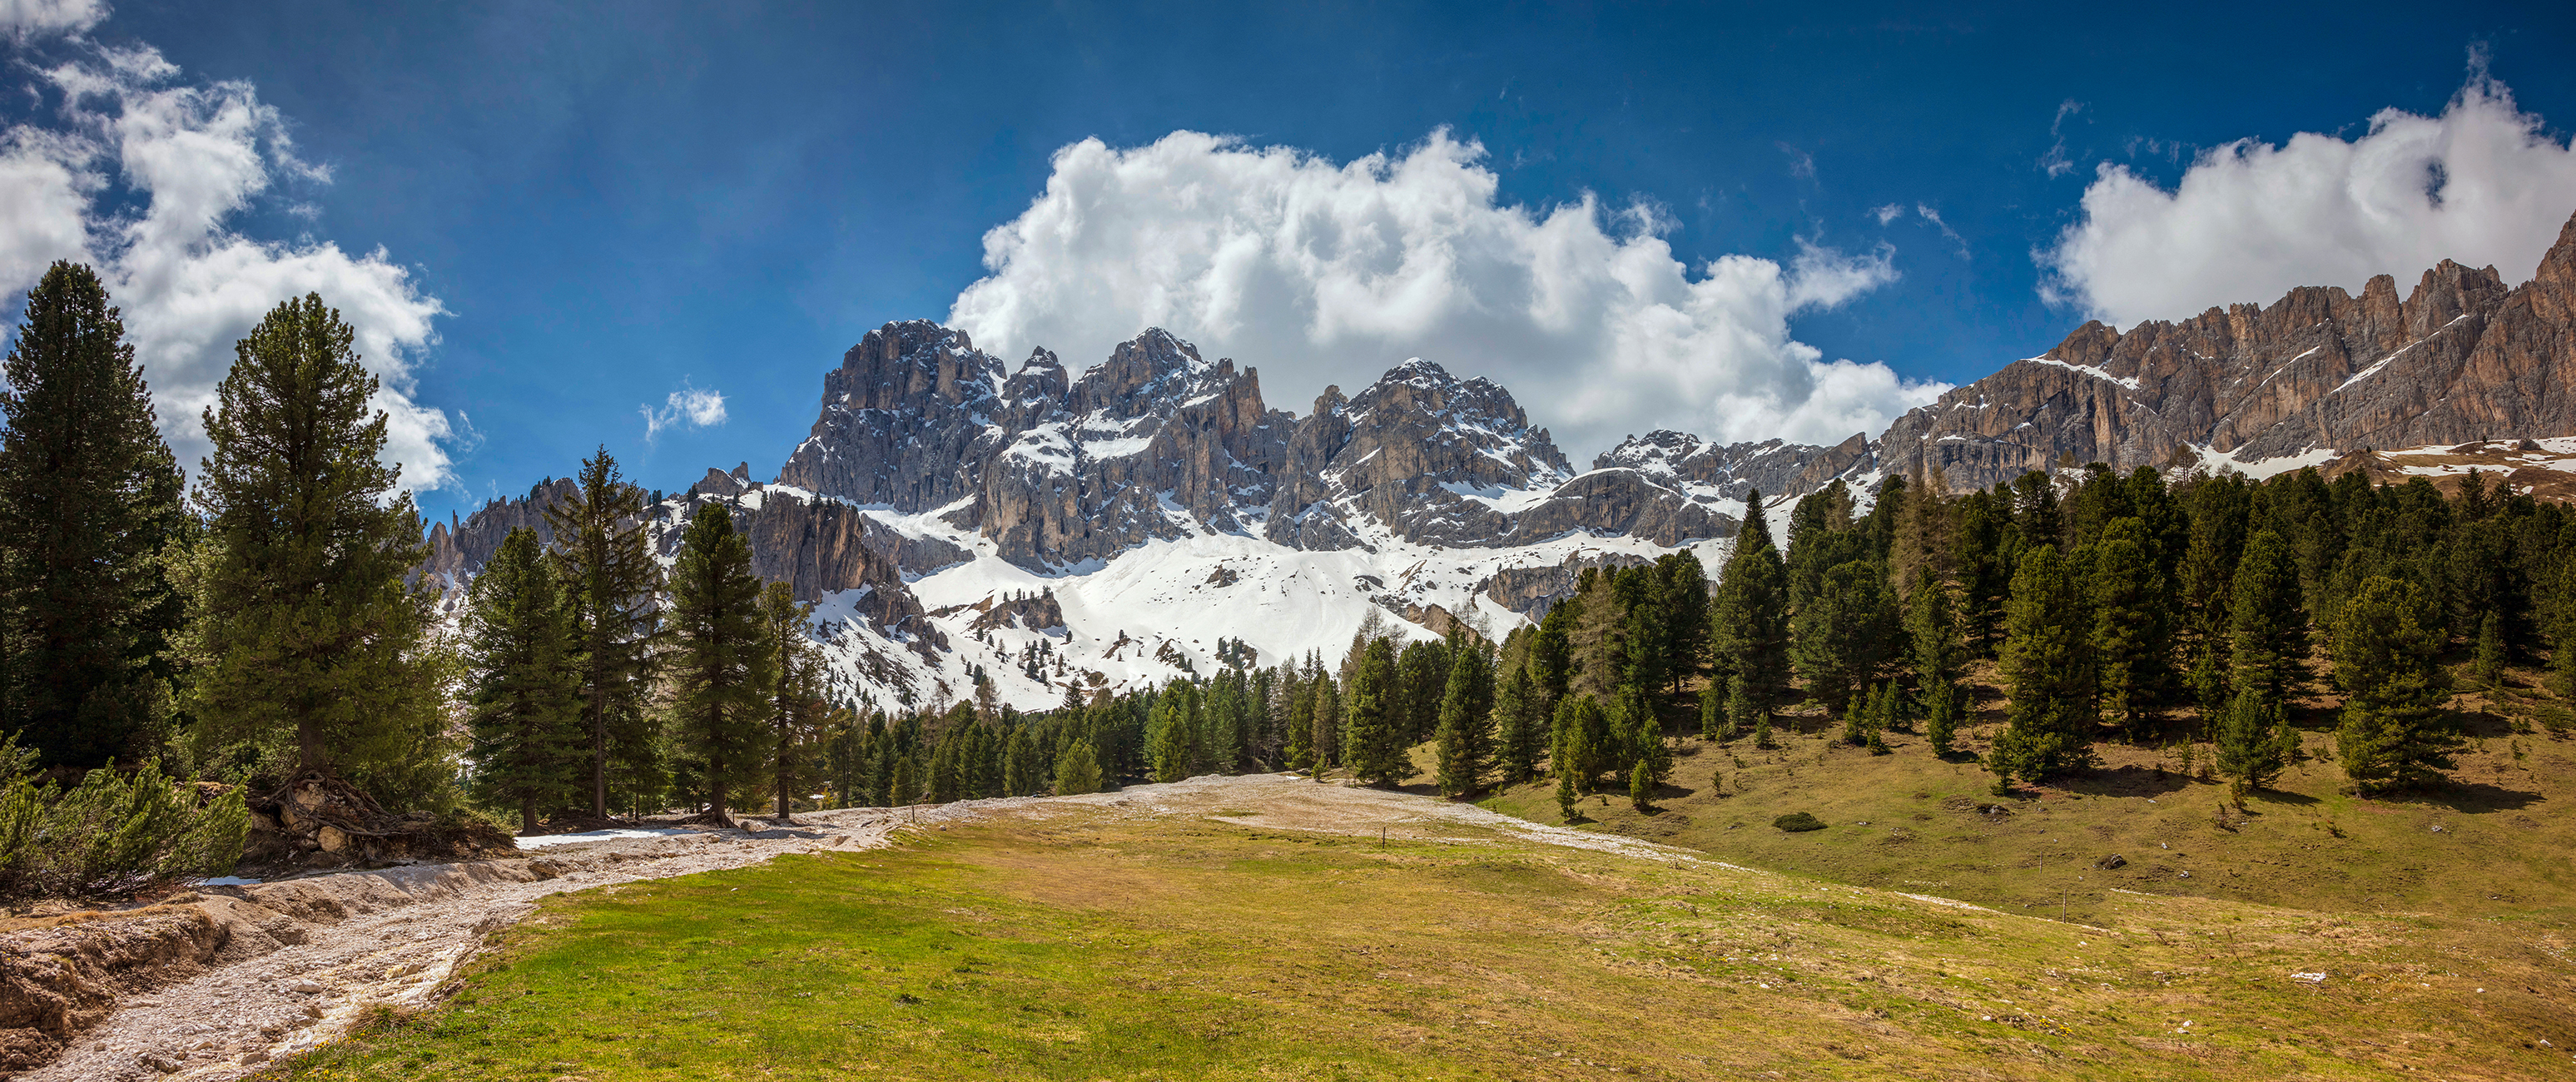 dolomites, alps, mountains,  panorama,  Gregor